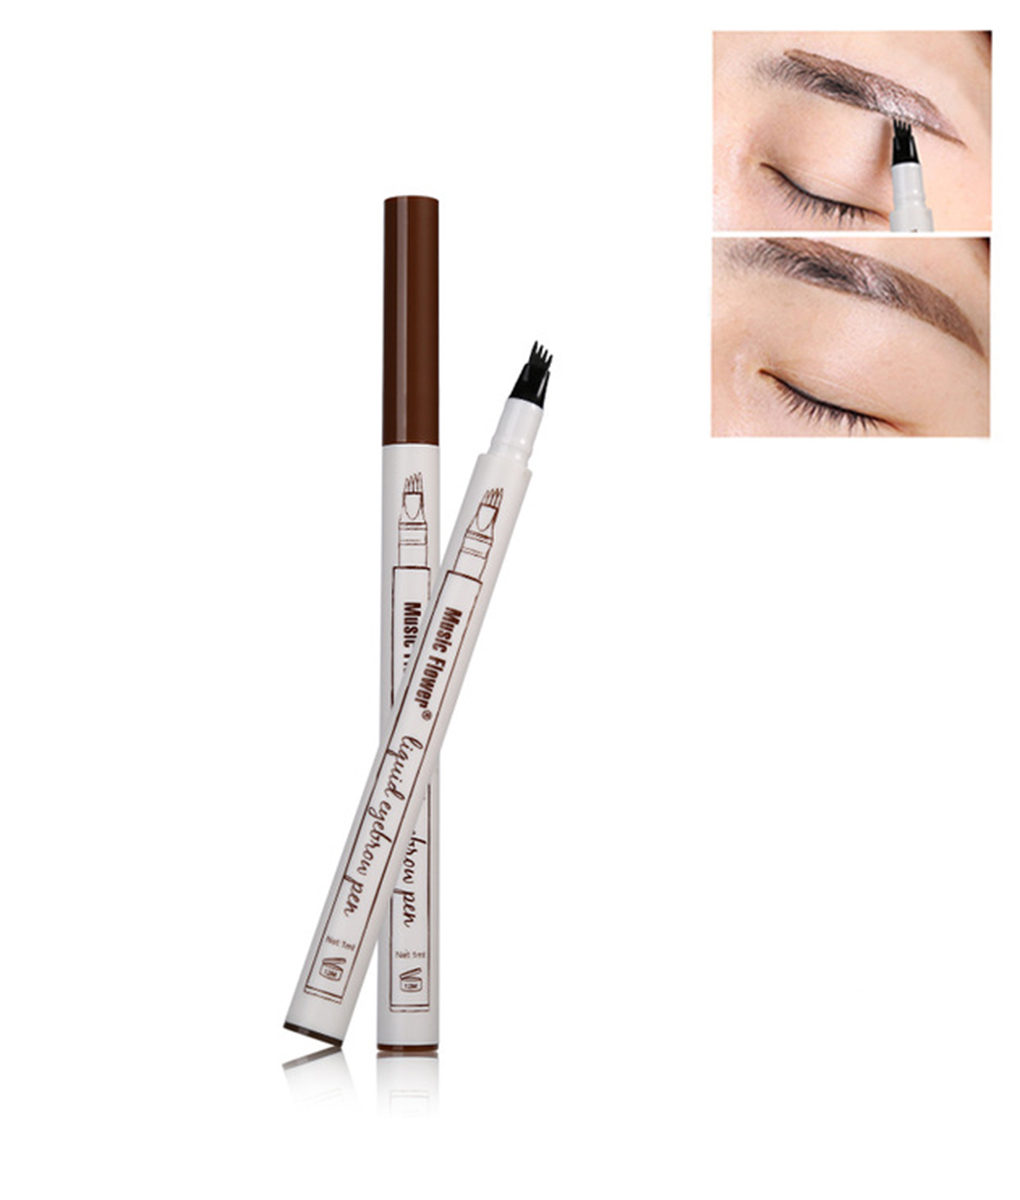 2018 Hot Patented Microblading Tattoo Eyebrow Ink Pen Sketch Eye Brow Pencil 